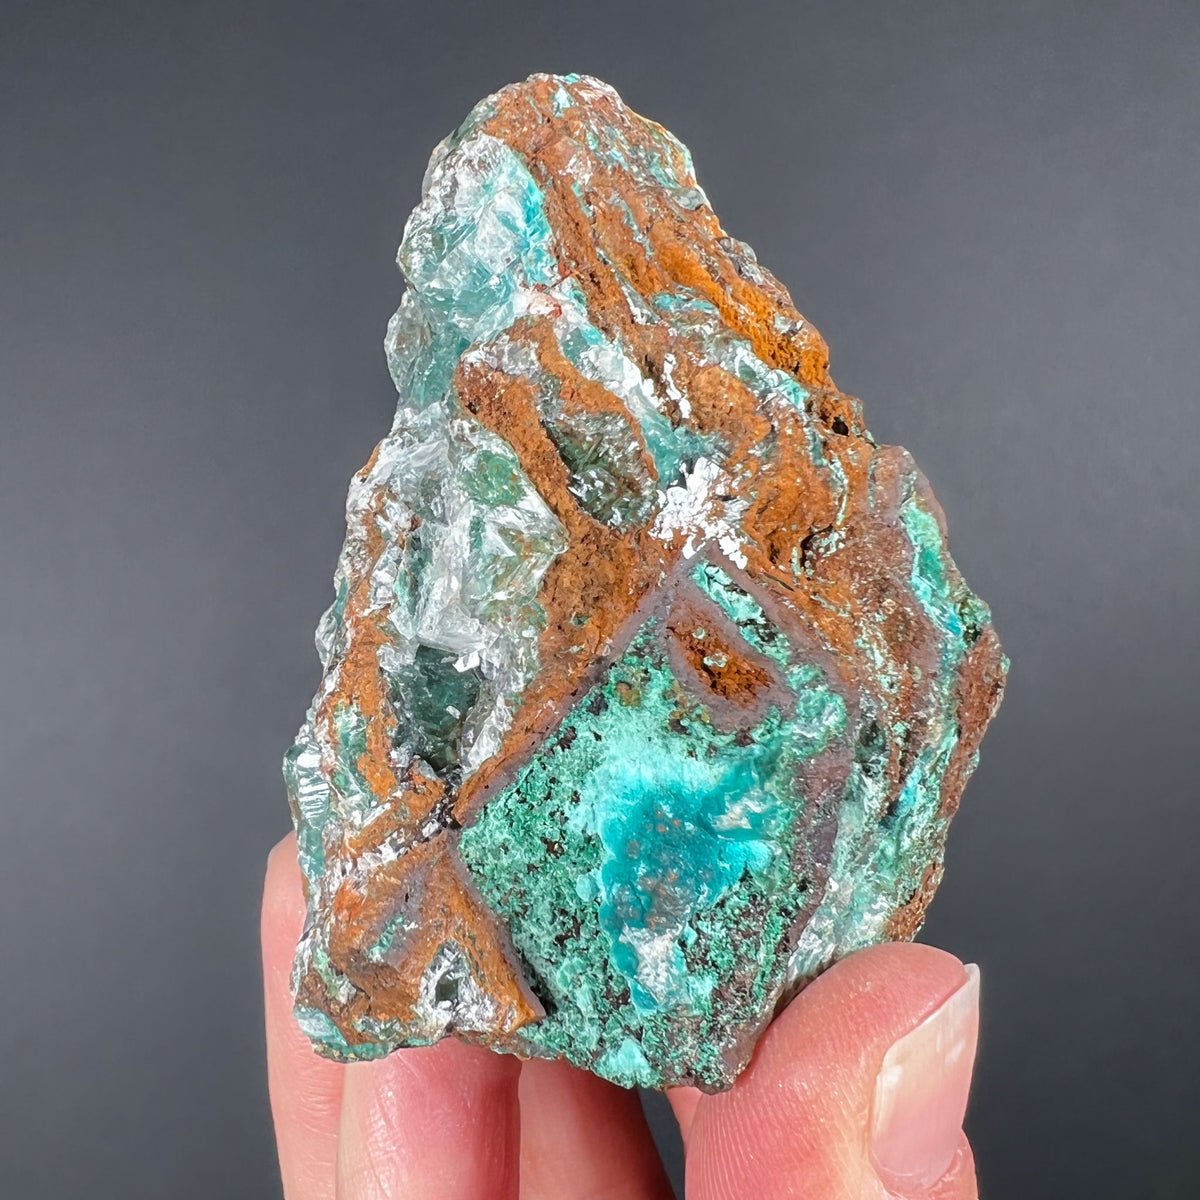 Aurichalcite with Calcite and Possibly Rosasite